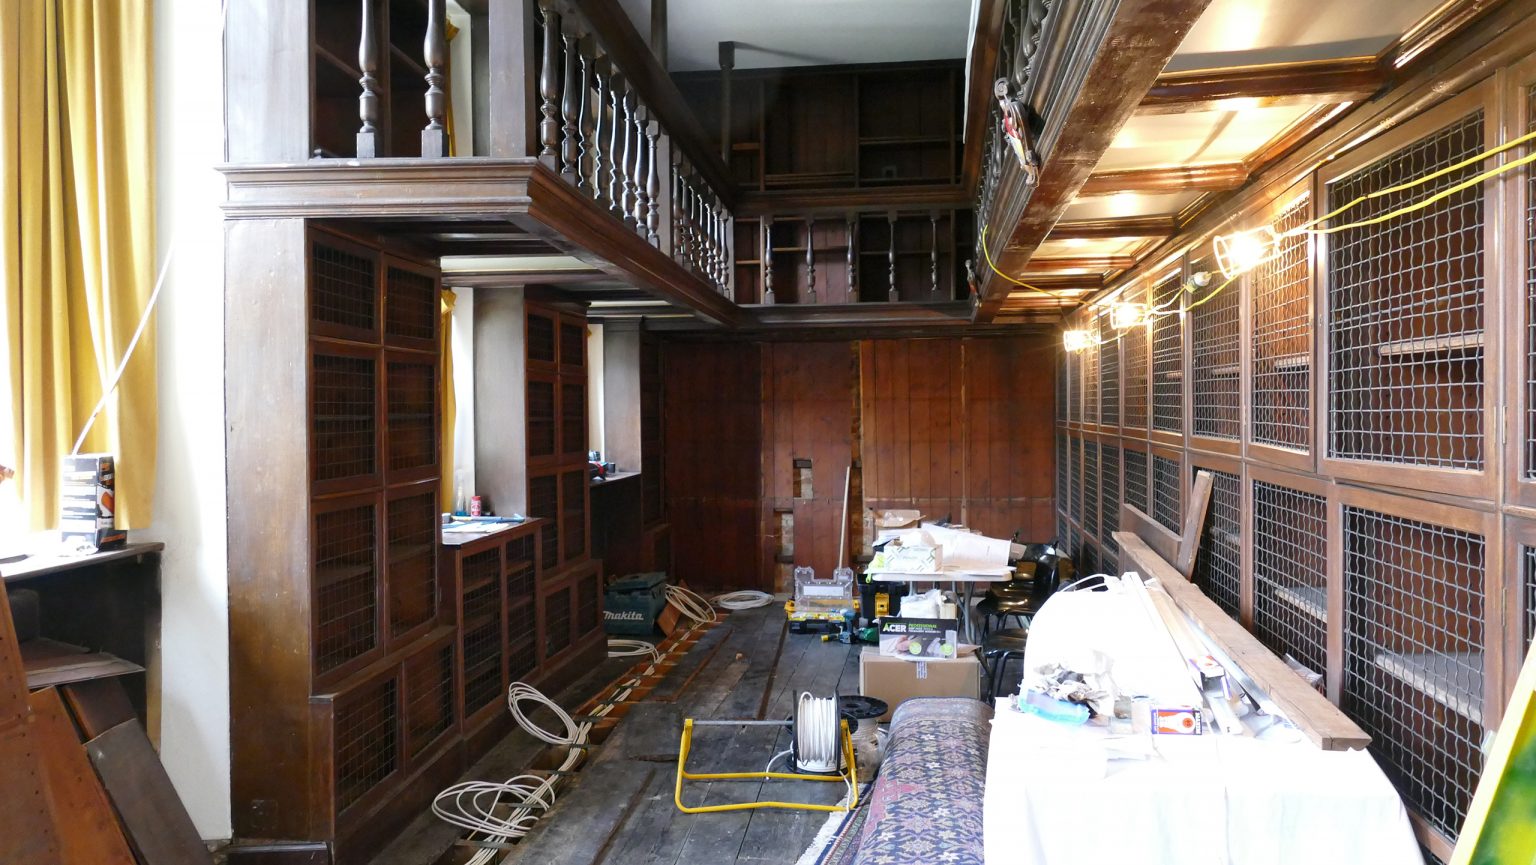 Inside the Old Library, once the books had been removed